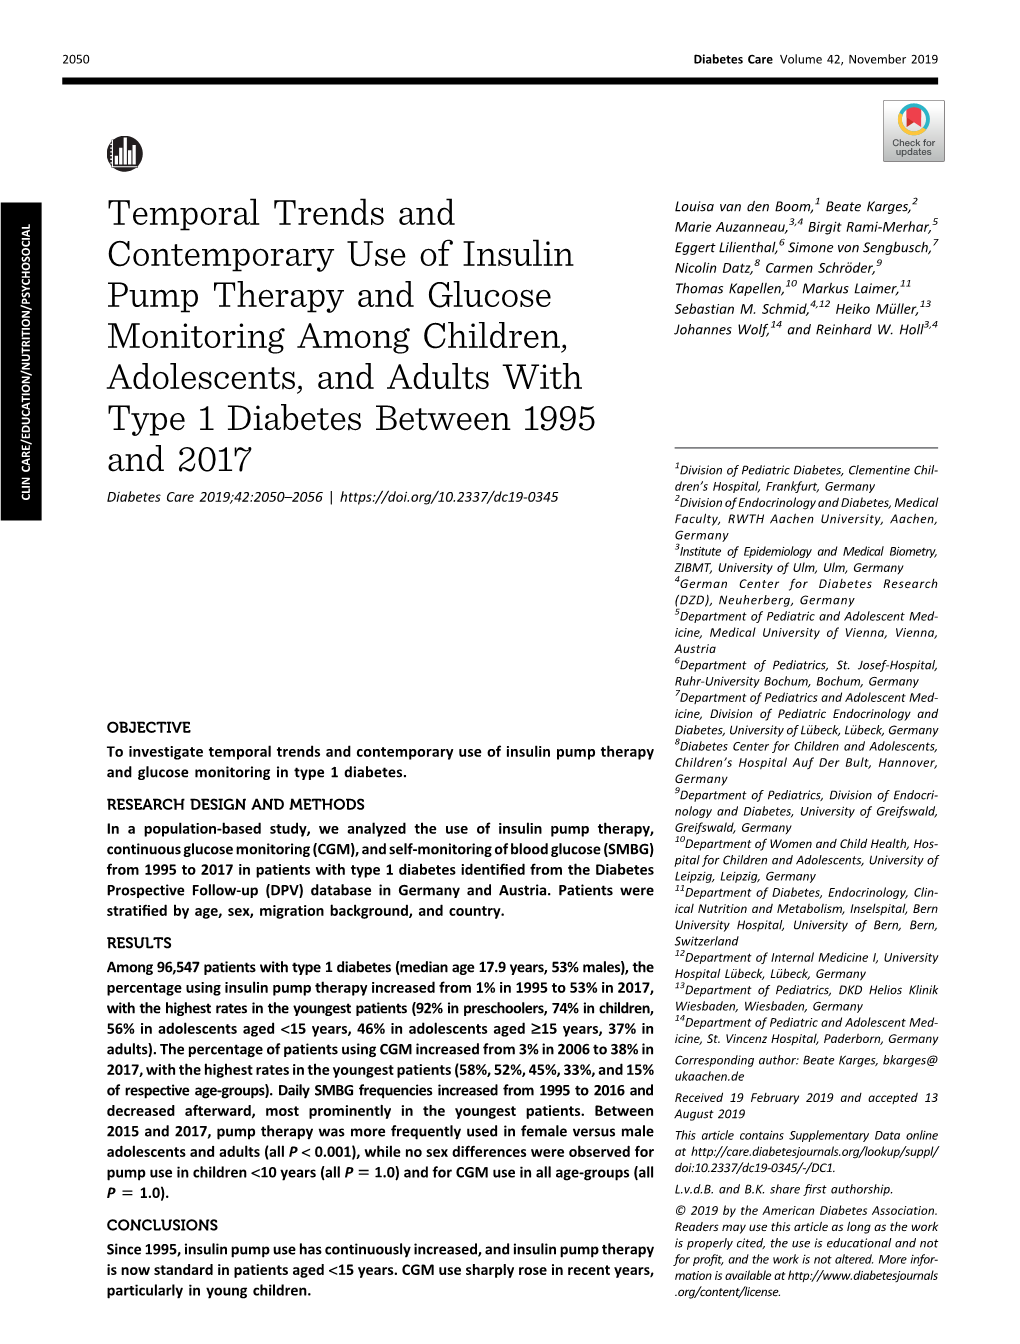 Temporal Trends and Contemporary Use of Insulin Pump Therapy And